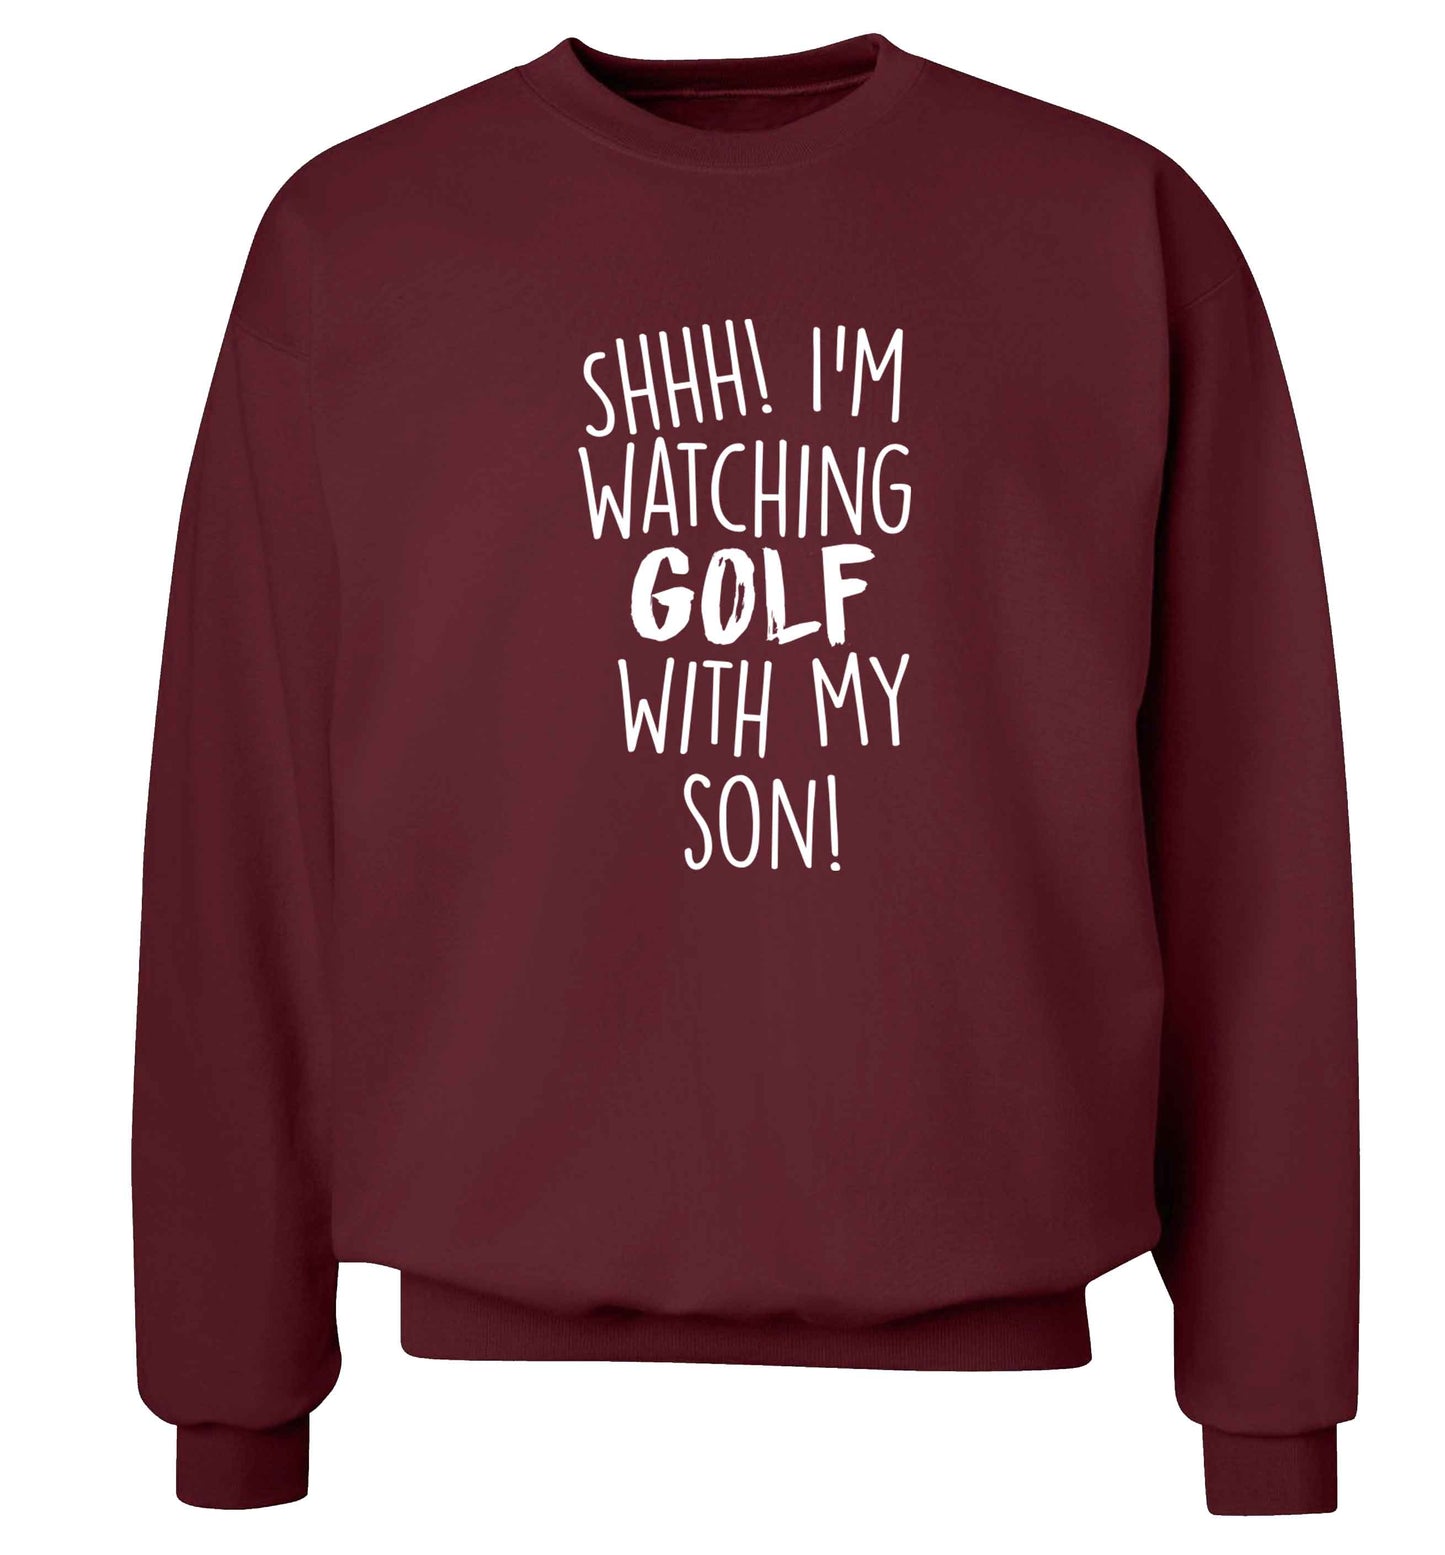 Shh I'm watching golf with my son Adult's unisex maroon Sweater 2XL